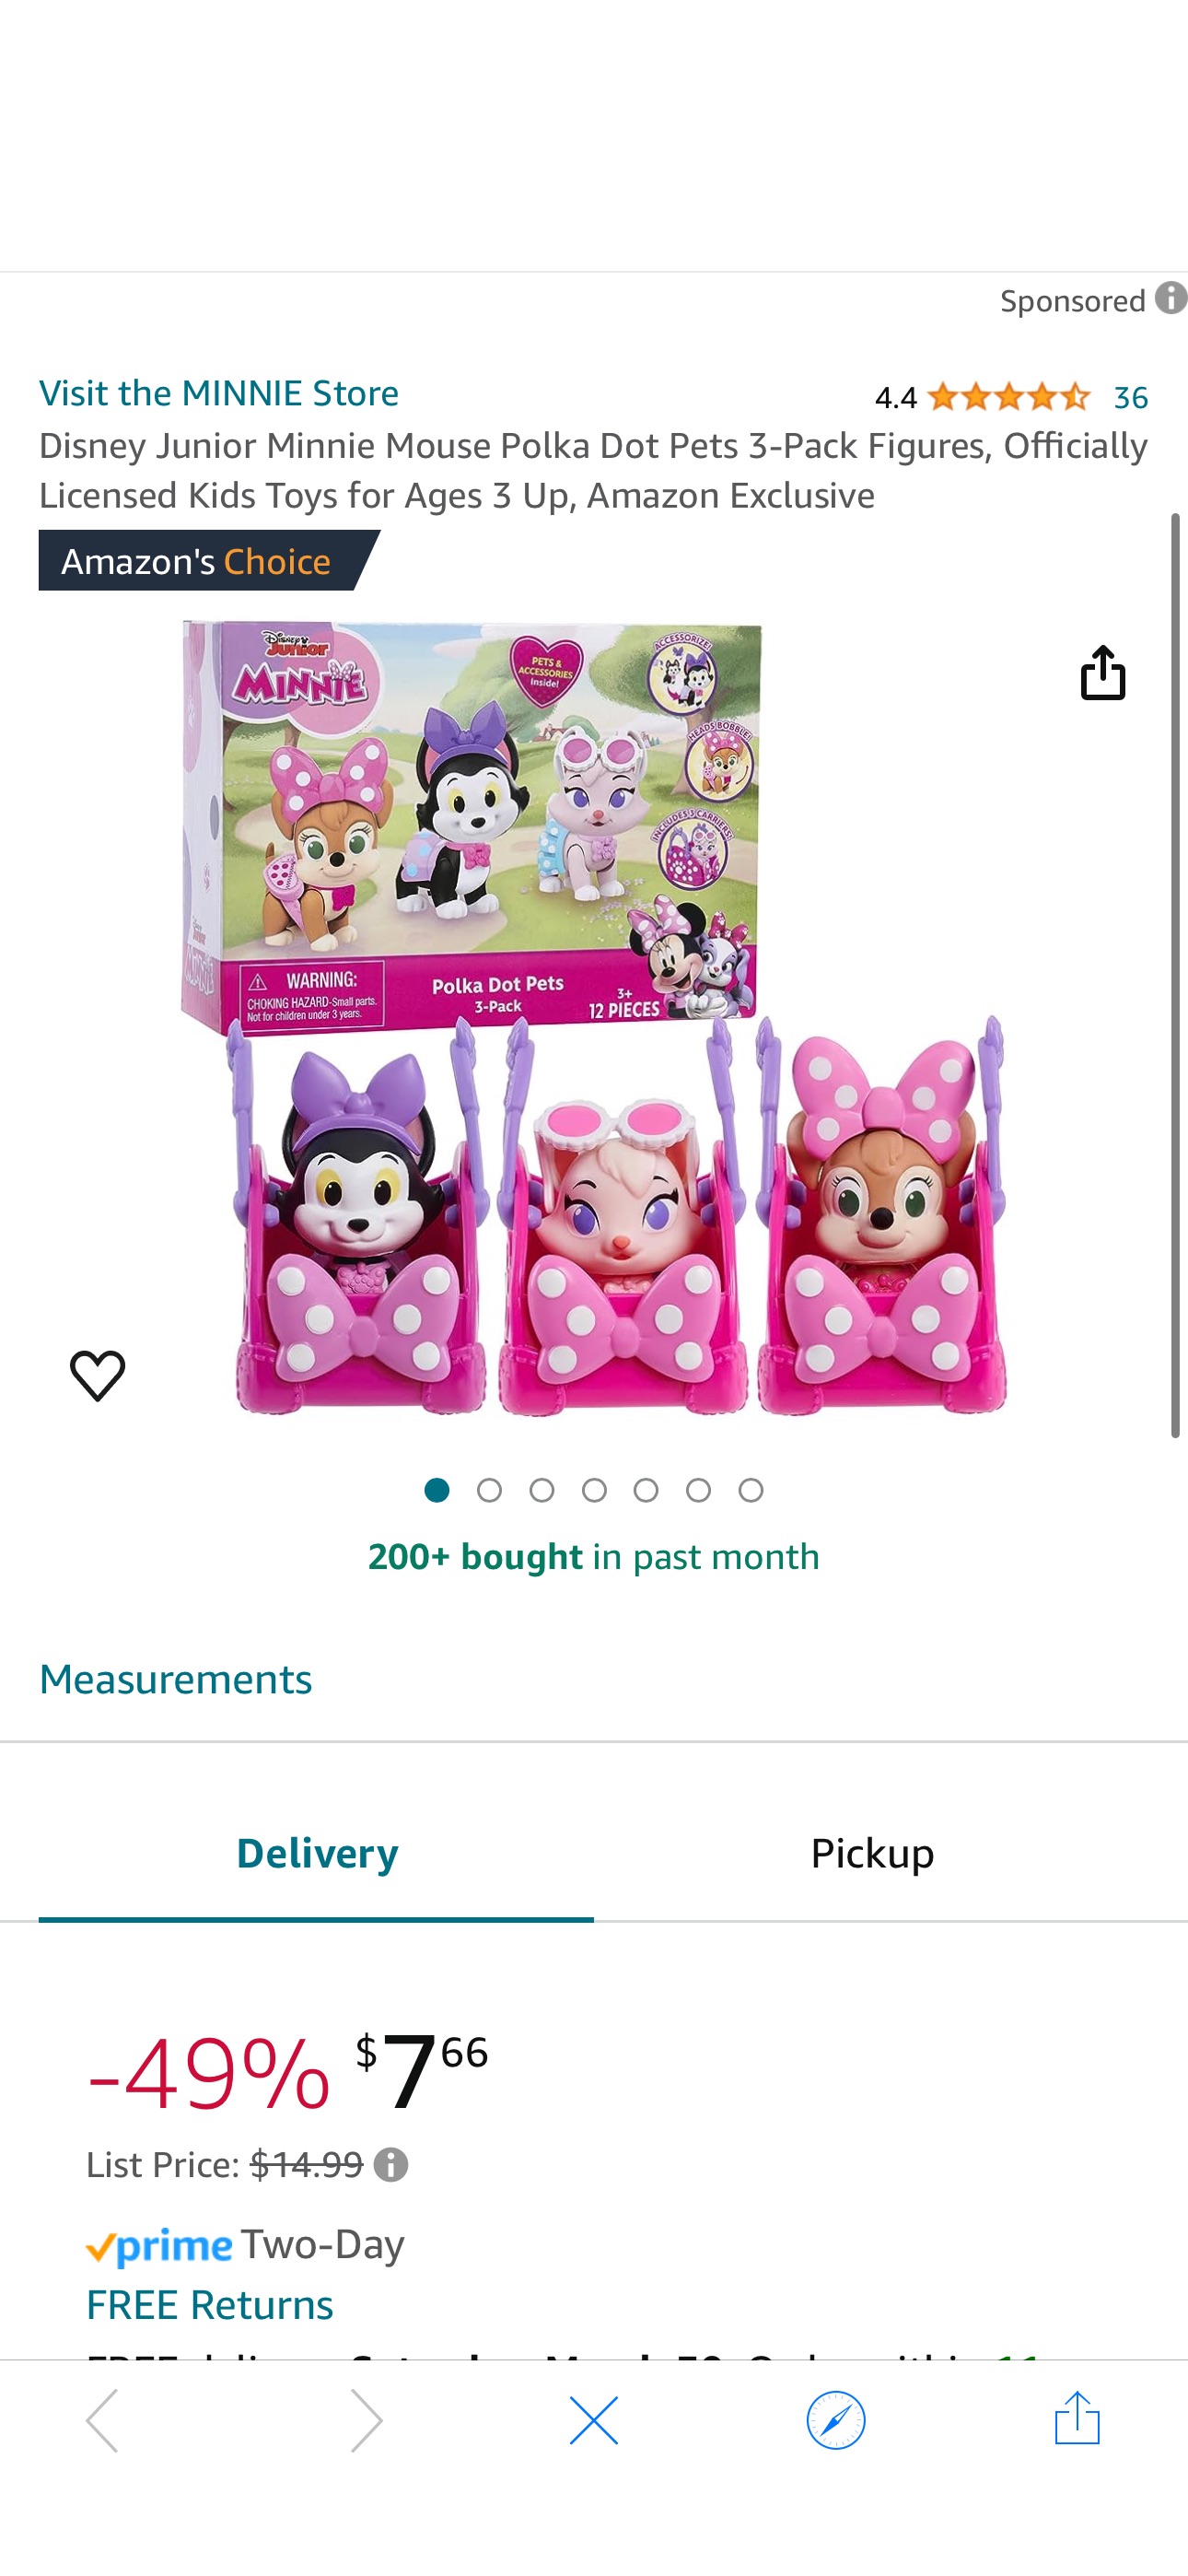 Amazon.com: Disney Junior Minnie Mouse Polka Dot Pets 3-Pack Figures, Officially Licensed Kids Toys for Ages 3 Up, Amazon Exclusive : Toys & Games